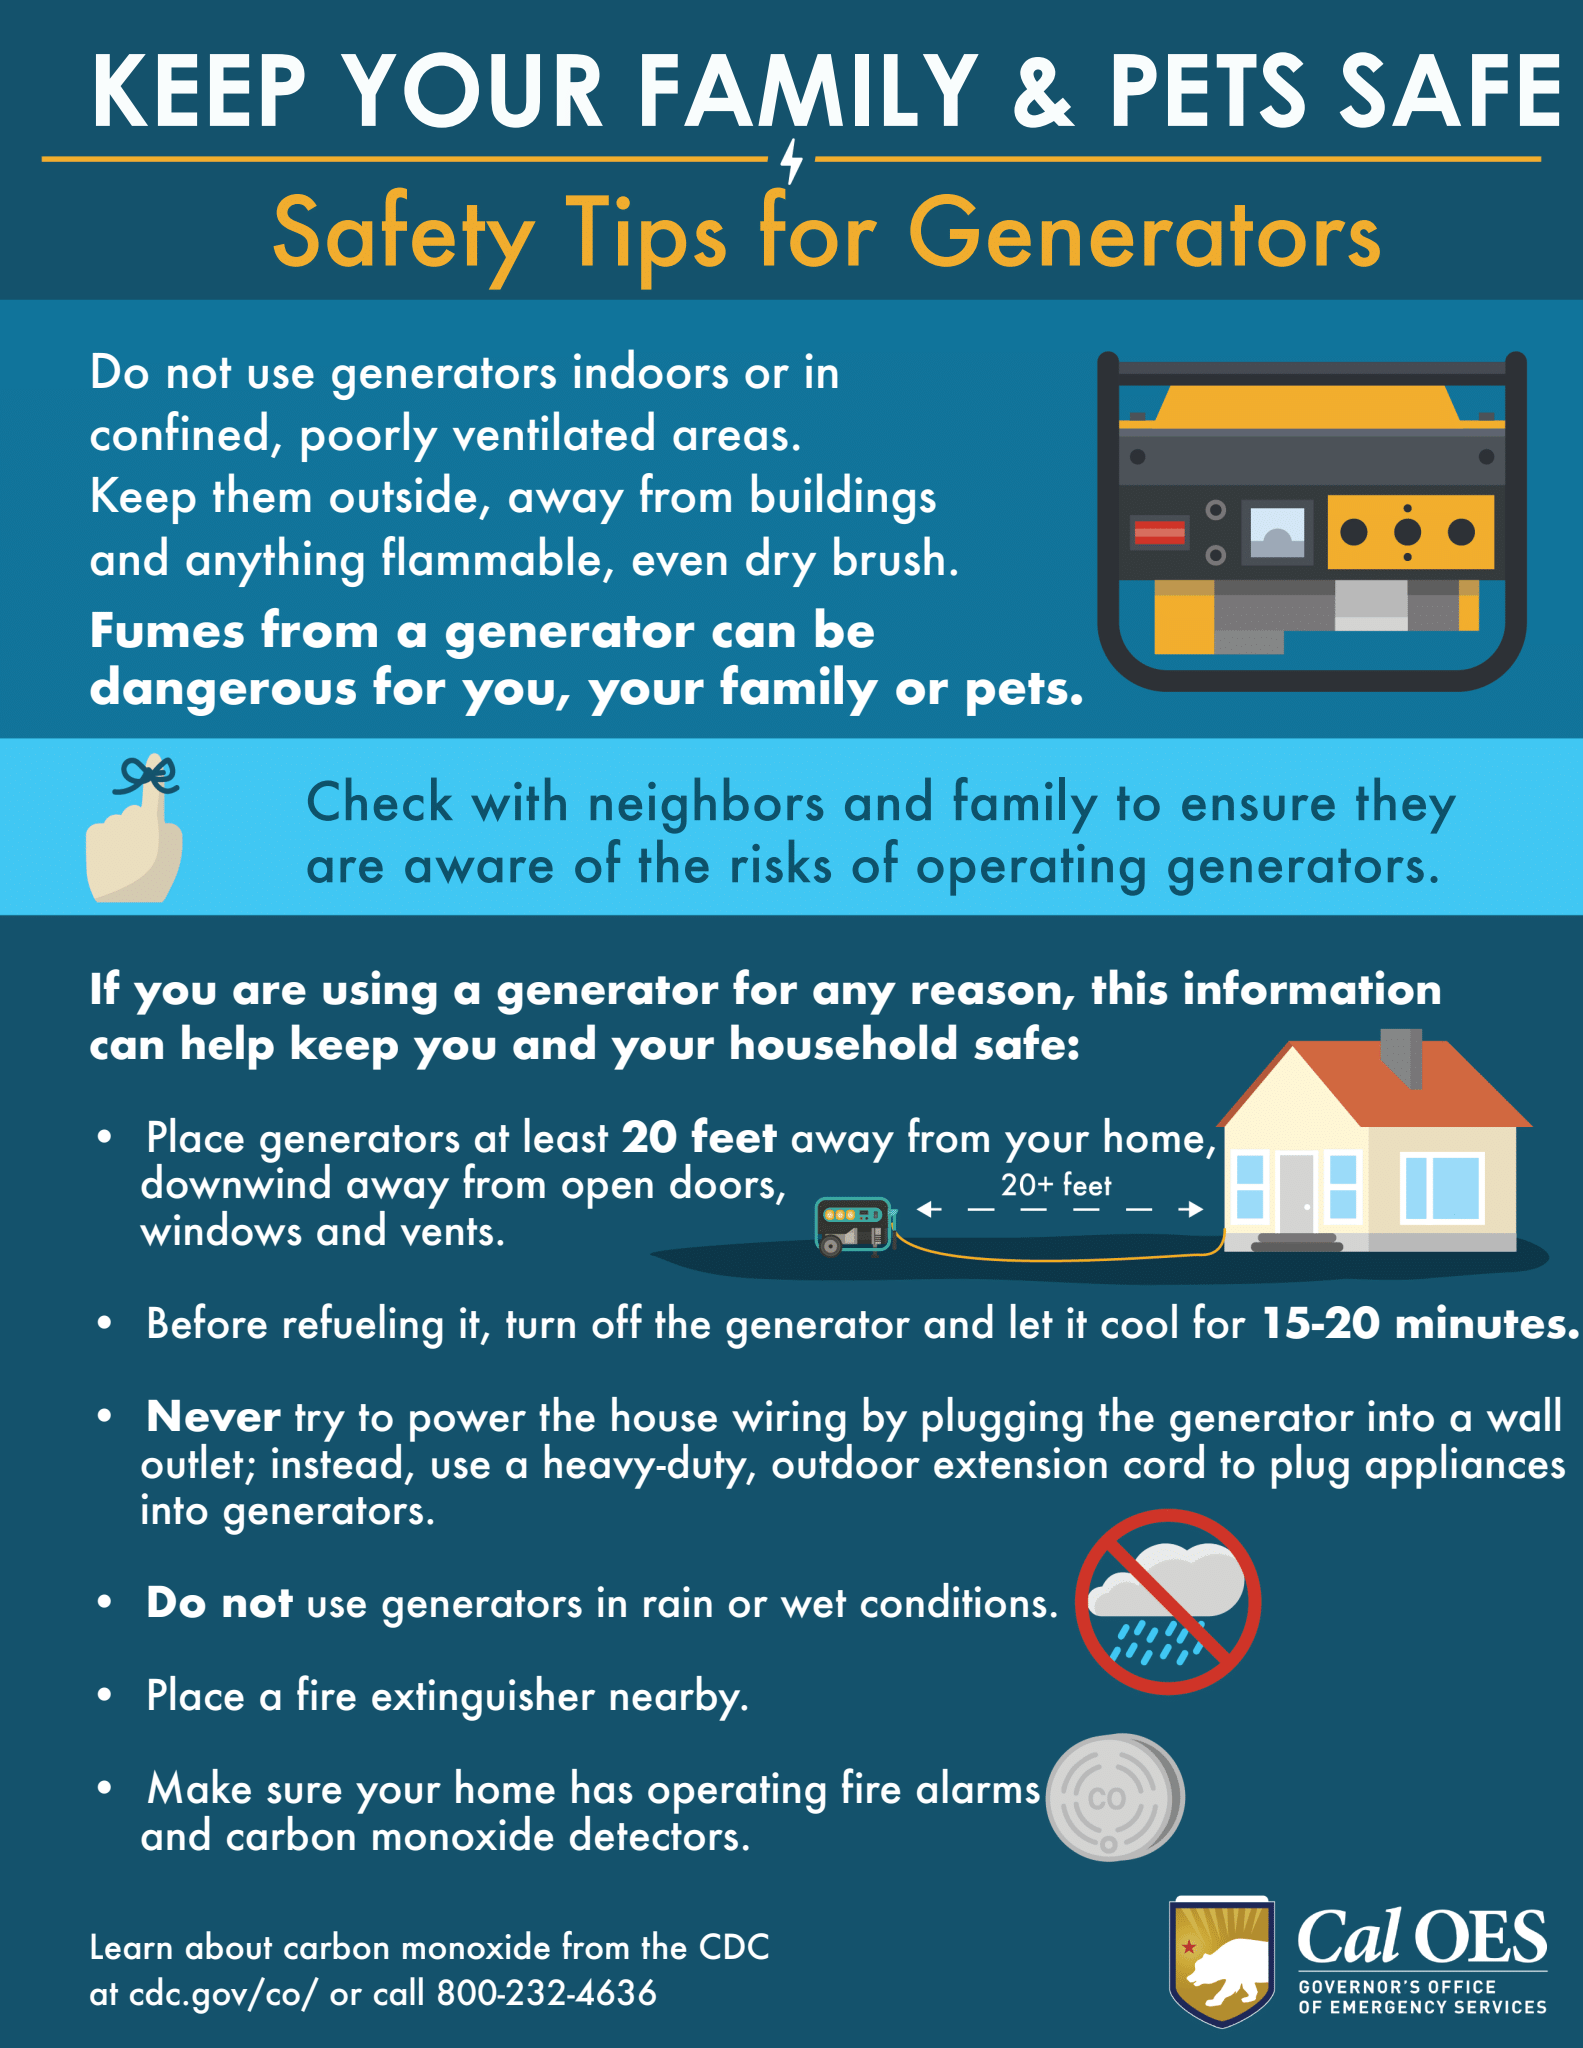 Don't use generators indoors or in confined. poorly ventilated areas. Keep them outside, away from buildings and anything flammable, even dry bush. Check with neighbors and family to ensure they are aware of the risk of operating generators. If you are using generators for any reason, this information can help keep you and your household safe. Place generators at leatst 20 feet away from your home, downwind away from open doors, windows and vents. Before refueling it, turn off generator ad let it cool for 15-20 minutes. Never try to power the house wiring by plugging the generator into a wall outlet; instead, use a heavy duty outdoor extensions cord to plug appliances into generators. do not use generators in rain or wet conditions. place a fire extinguisher nearby. make sure your home has operating fire alarms and carbon monoxide detectors. Learn about carbon monoxide from the CDC at cdc.gov/co/ or call 800-232-4636